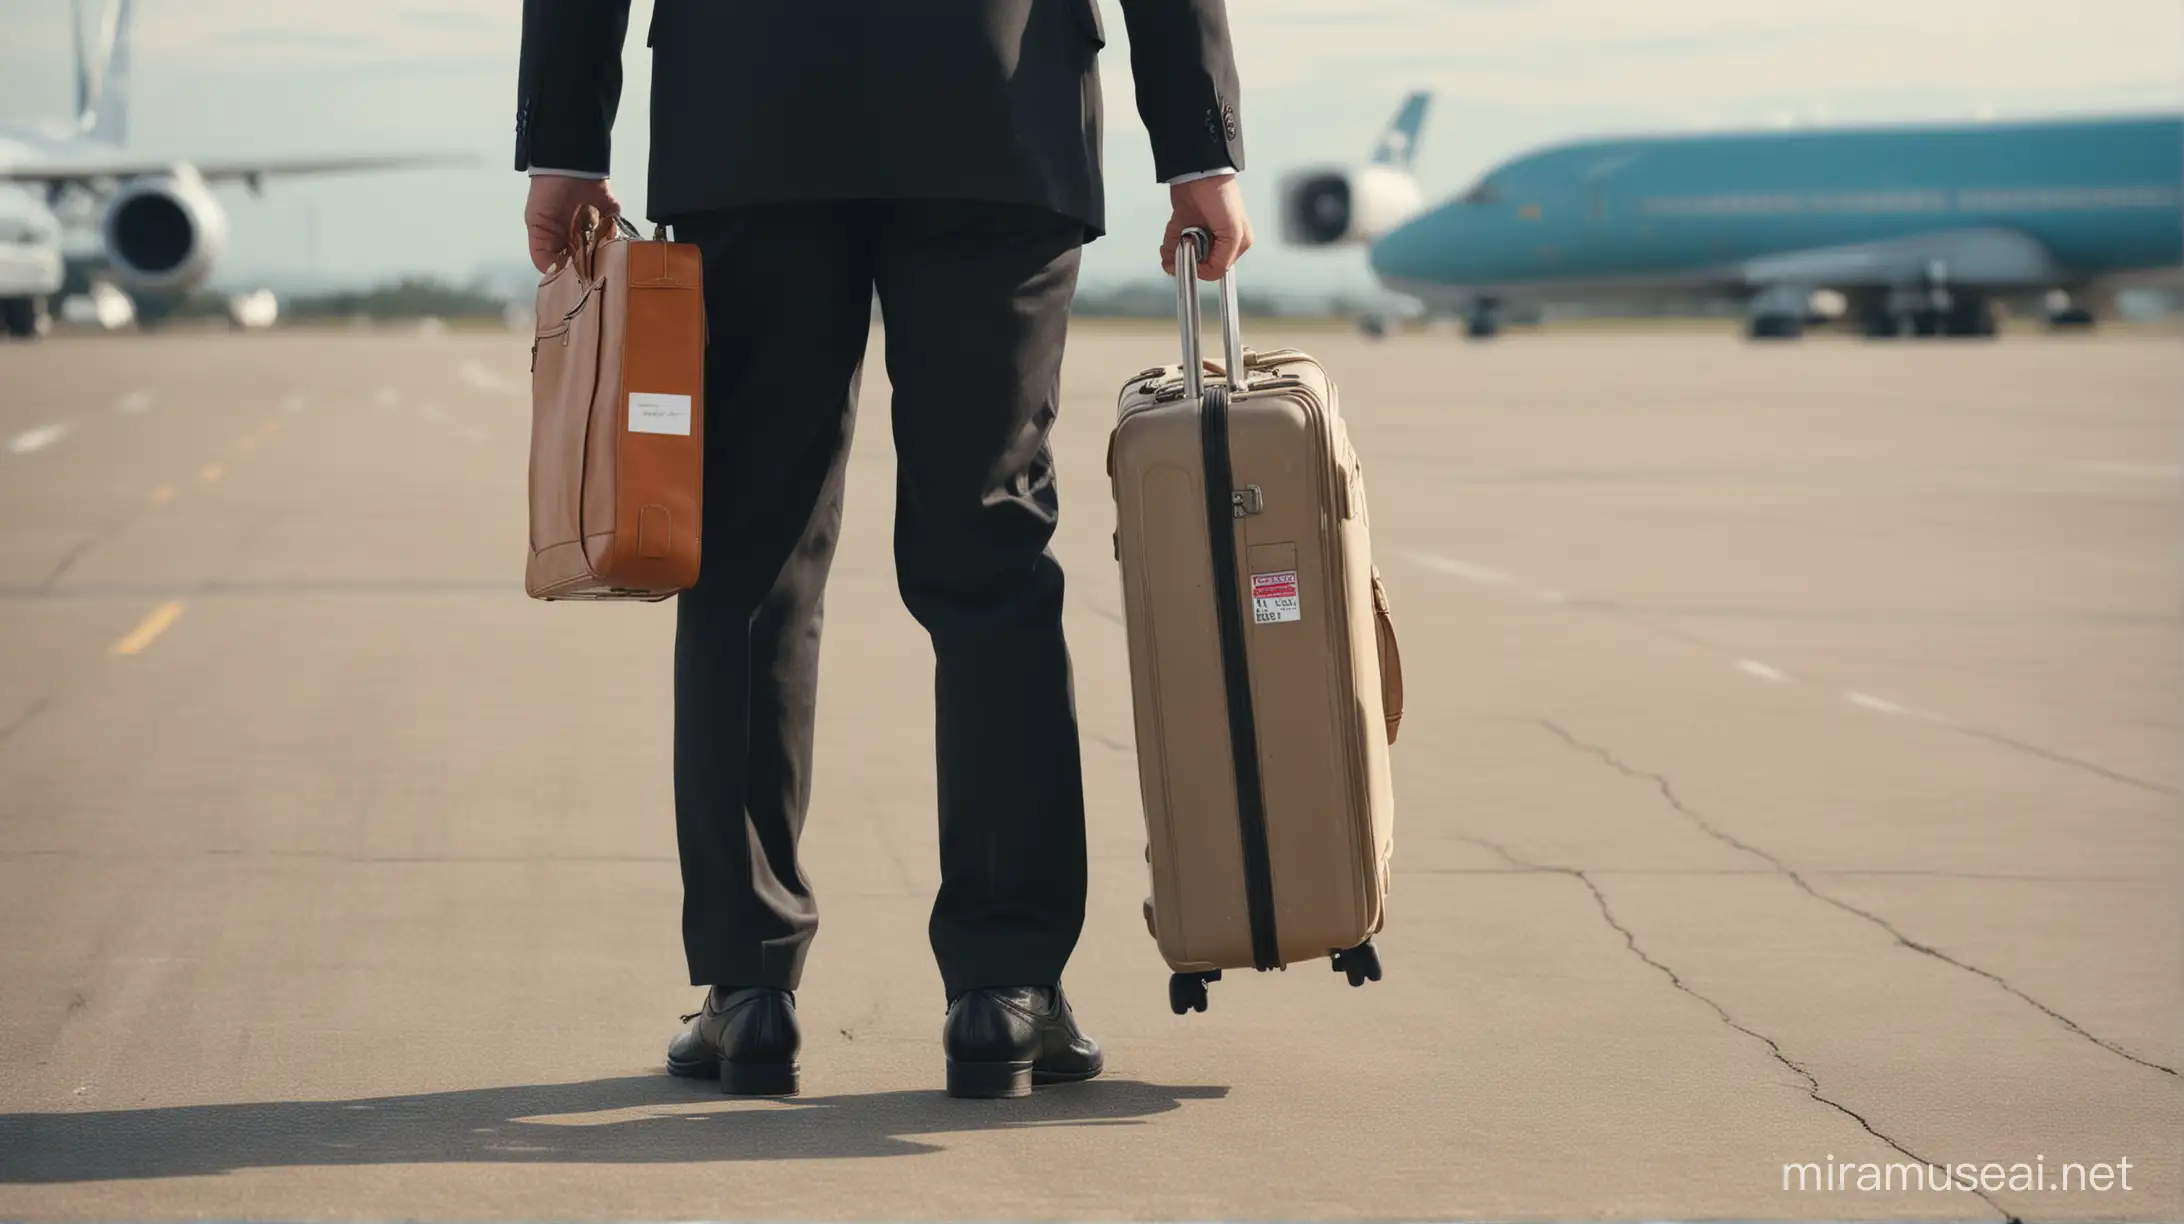 man in suit with suitcase walking to an airplaine. the suitcase has a bright tag that is visible. the suitcase should be clearly visible